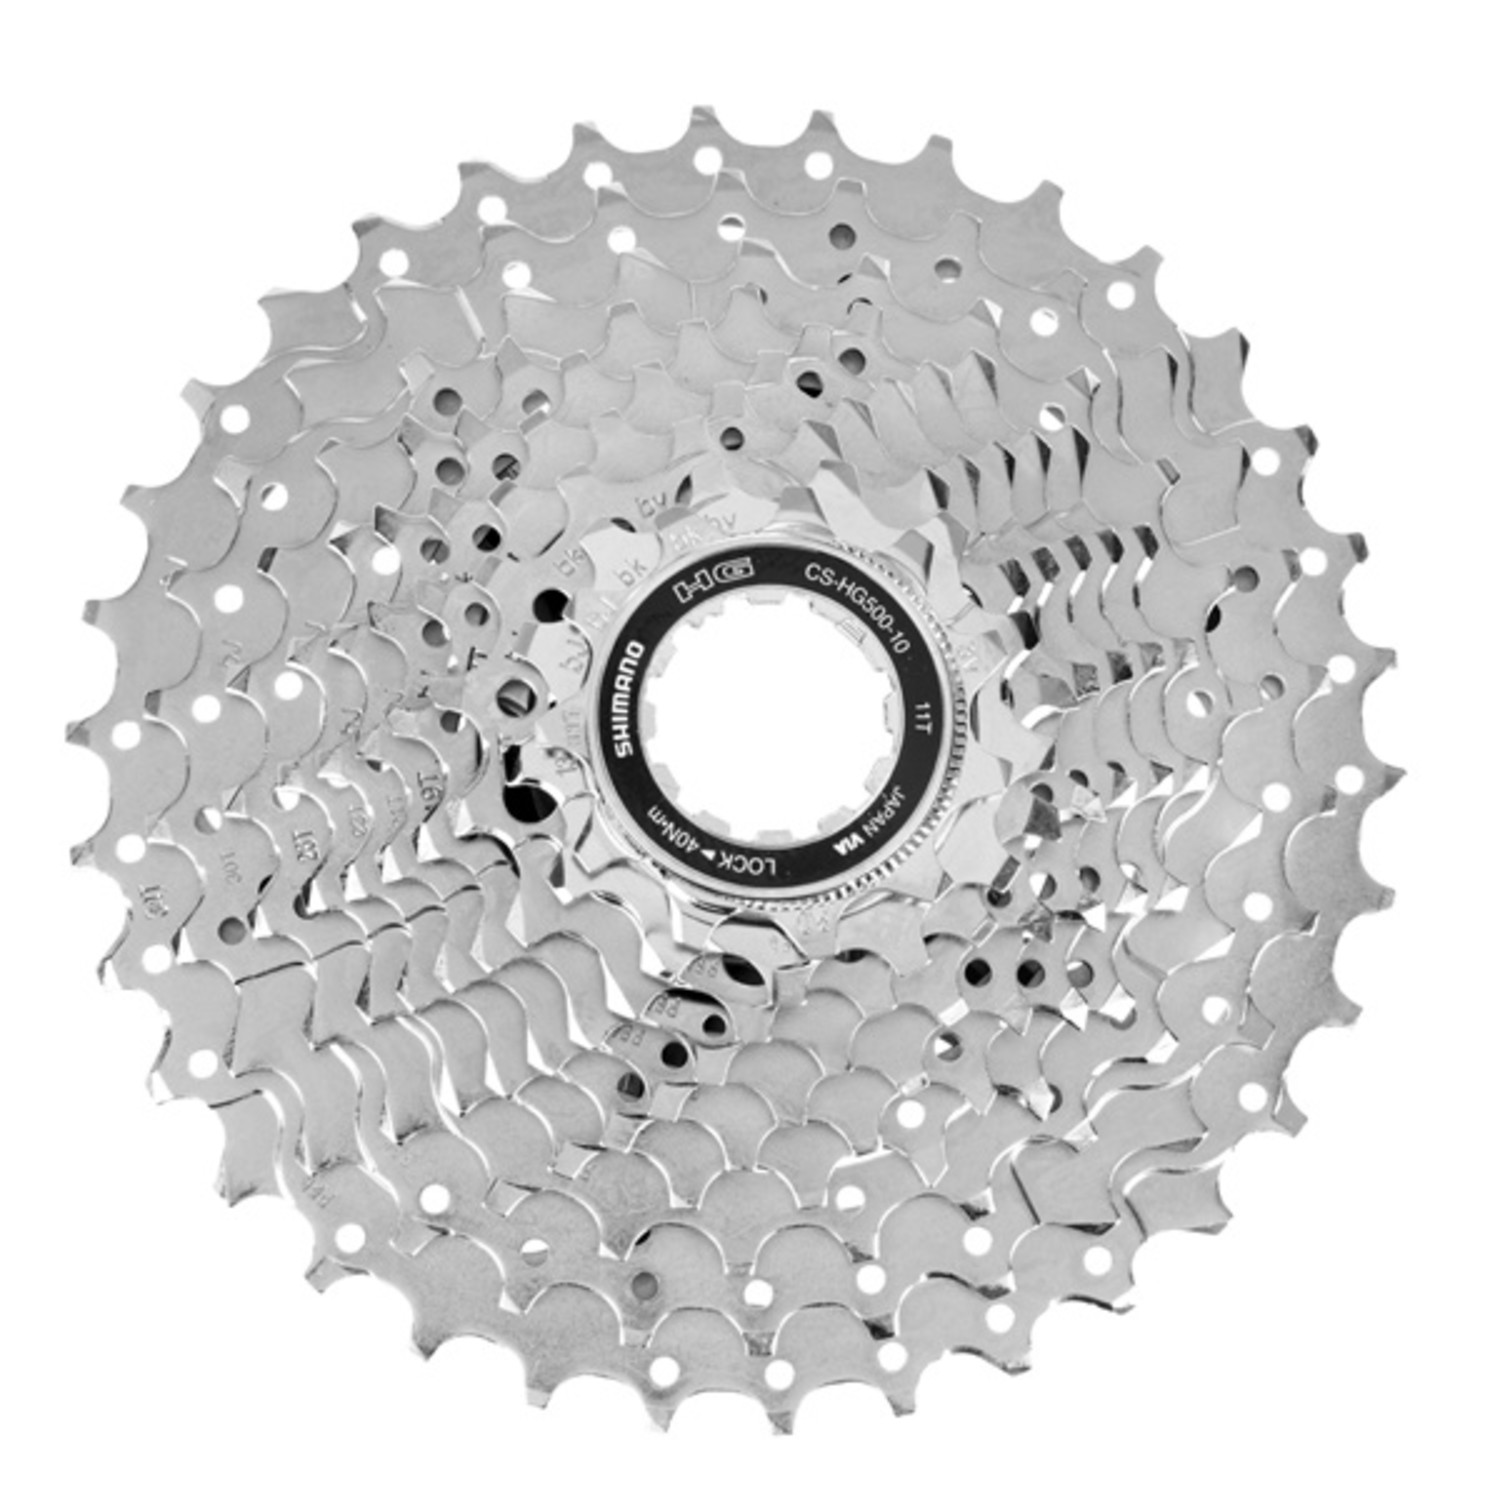 SHIMANO CASSETTE 10-SPEED CS-HG500-10 T11-34 - GEJO Cycleworld